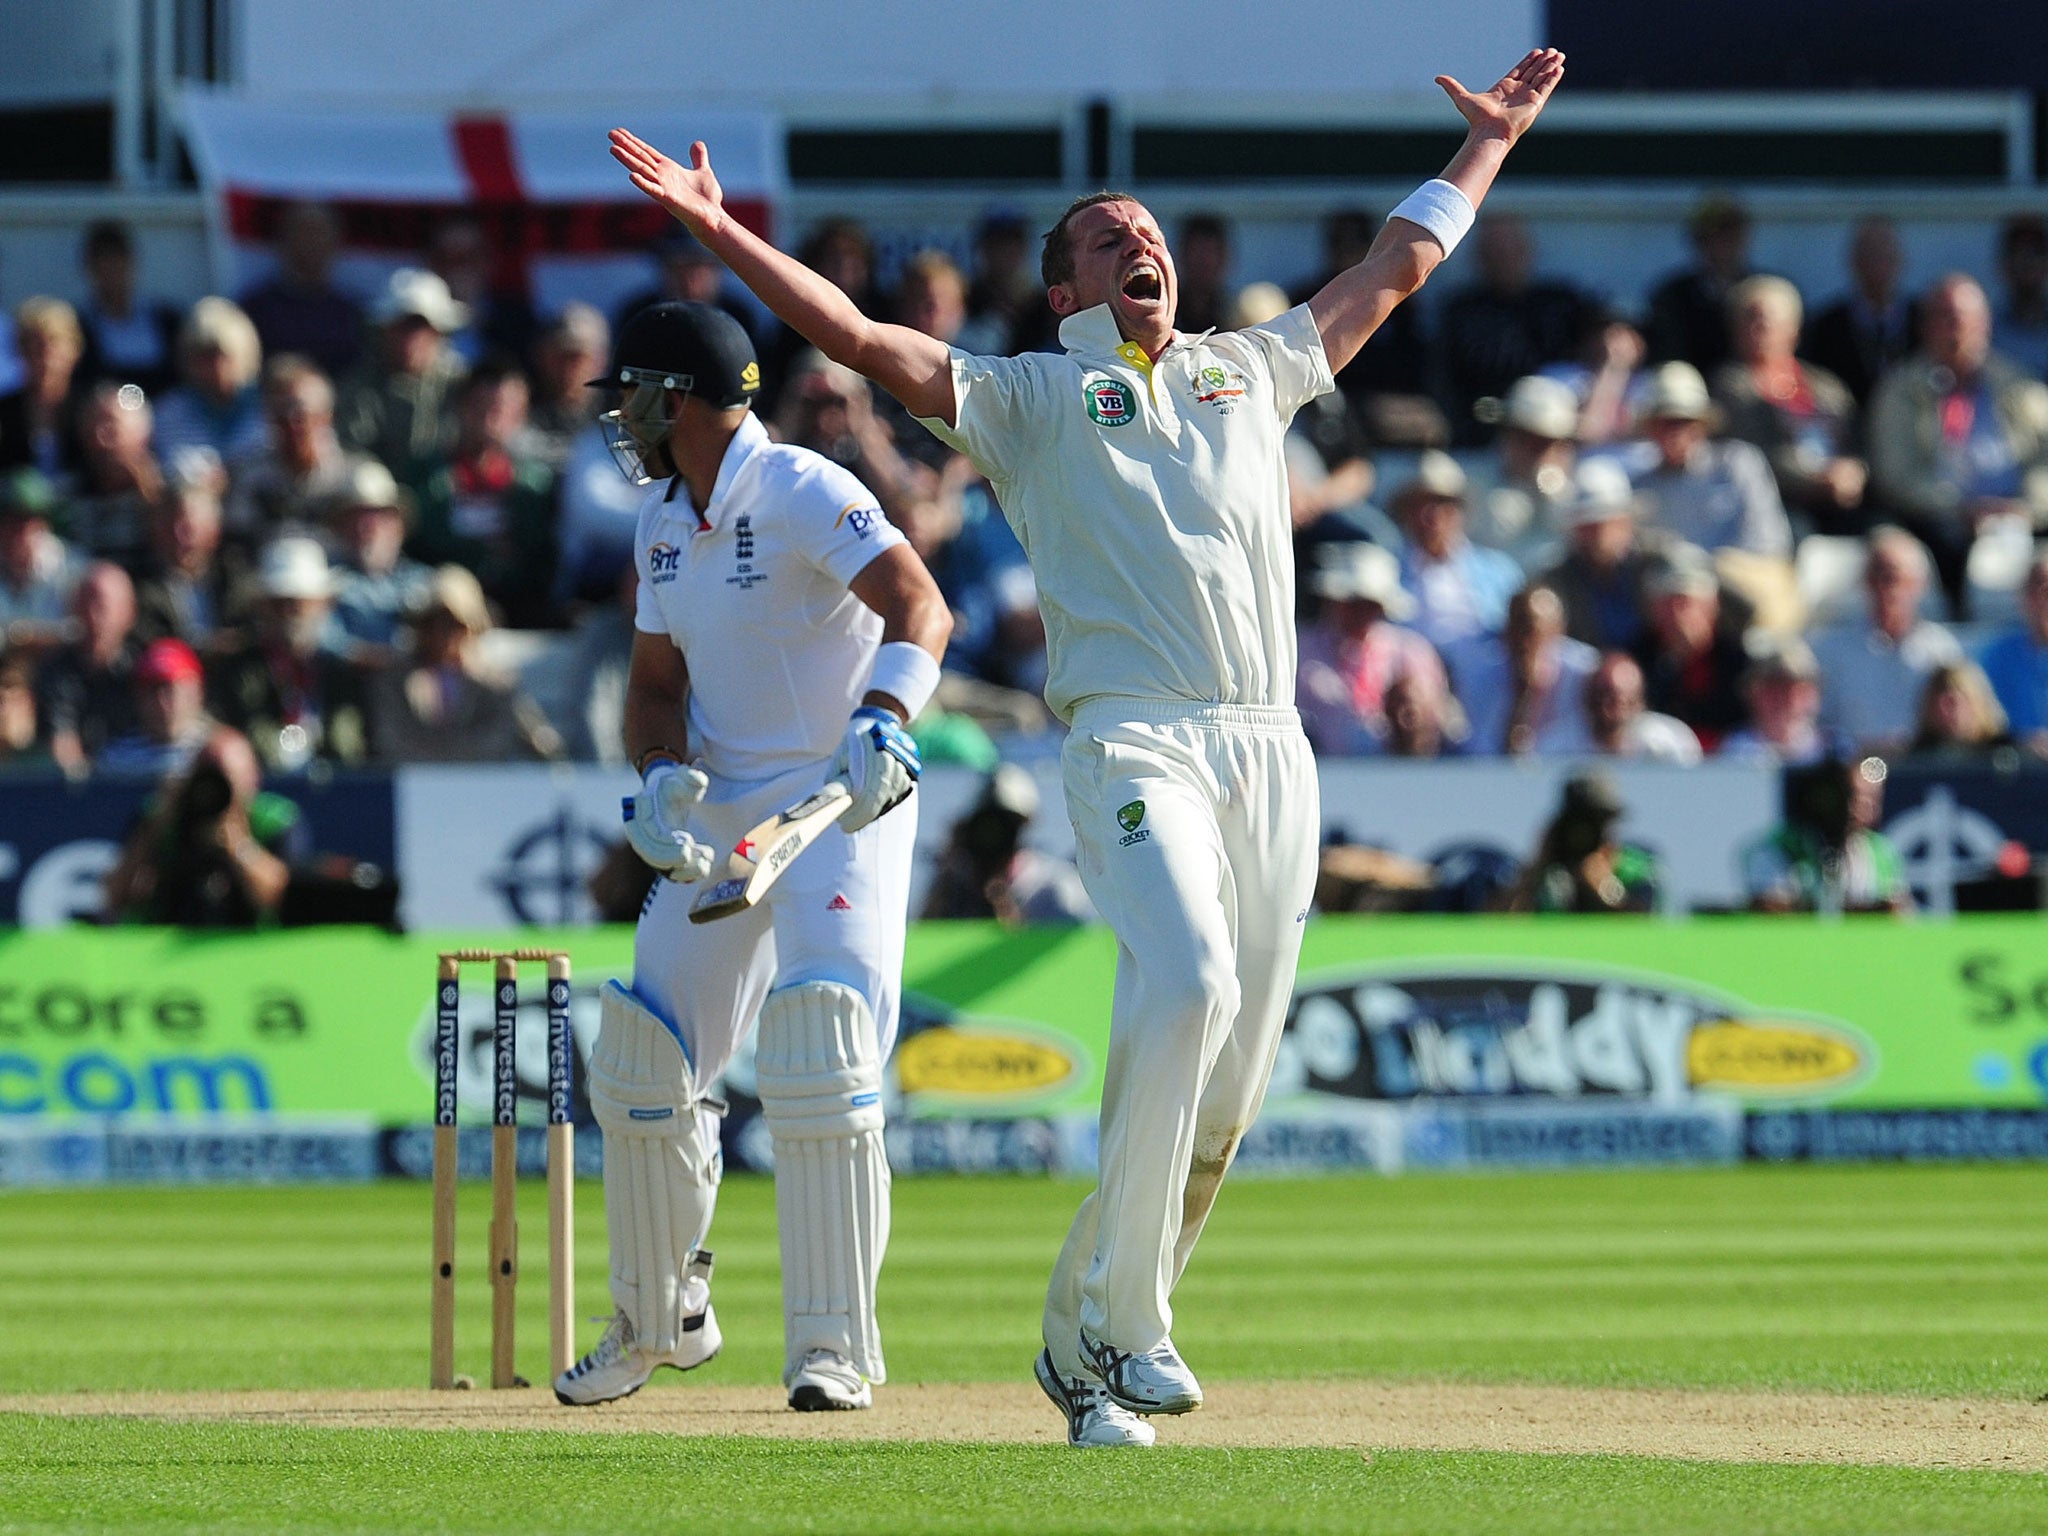 Peter Siddle appeals for lbw against Matt Prior, upheld on review